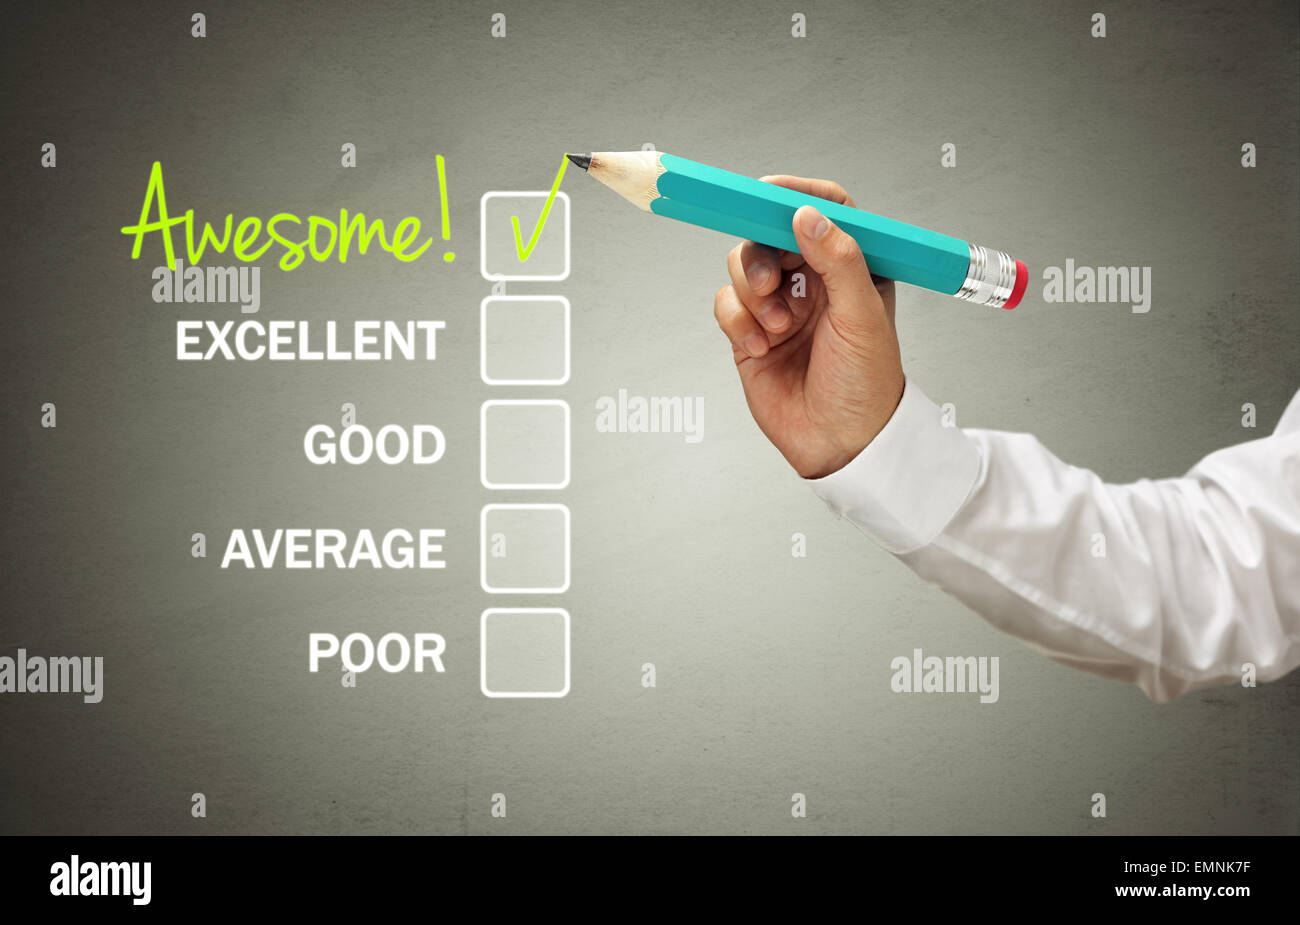 Tick placed in awesome checkbox on customer service satisfaction survey form Stock Photo